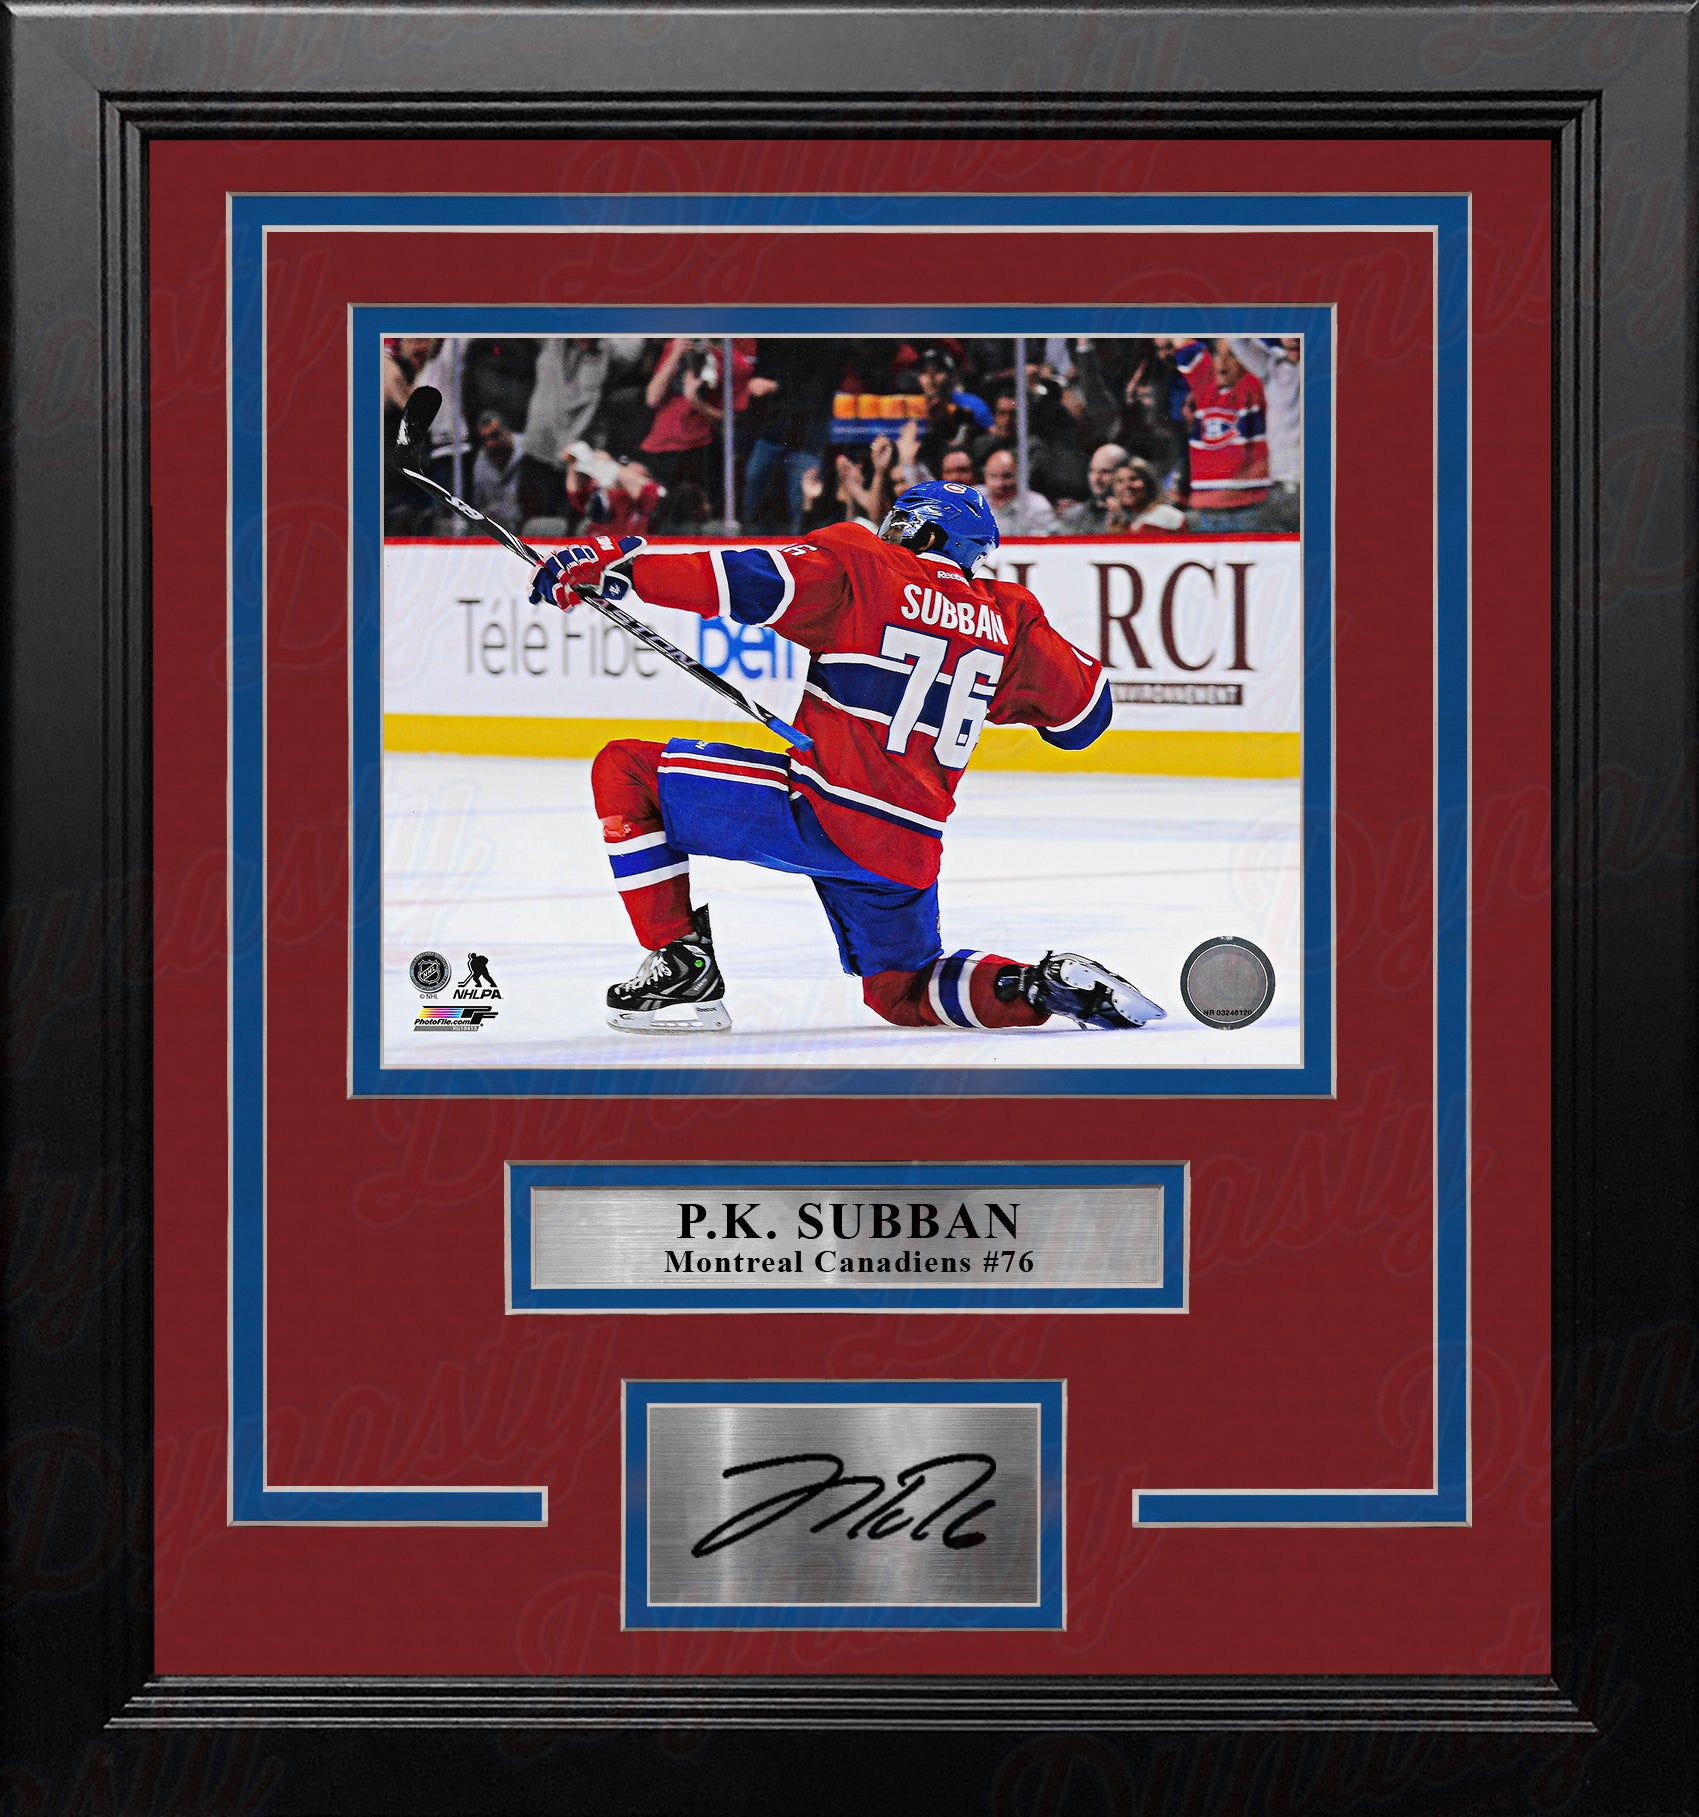 P.K. Subban Celebration Montreal Canadiens 8" x 10" Framed Hockey Photo with Engraved Autograph - Dynasty Sports & Framing 